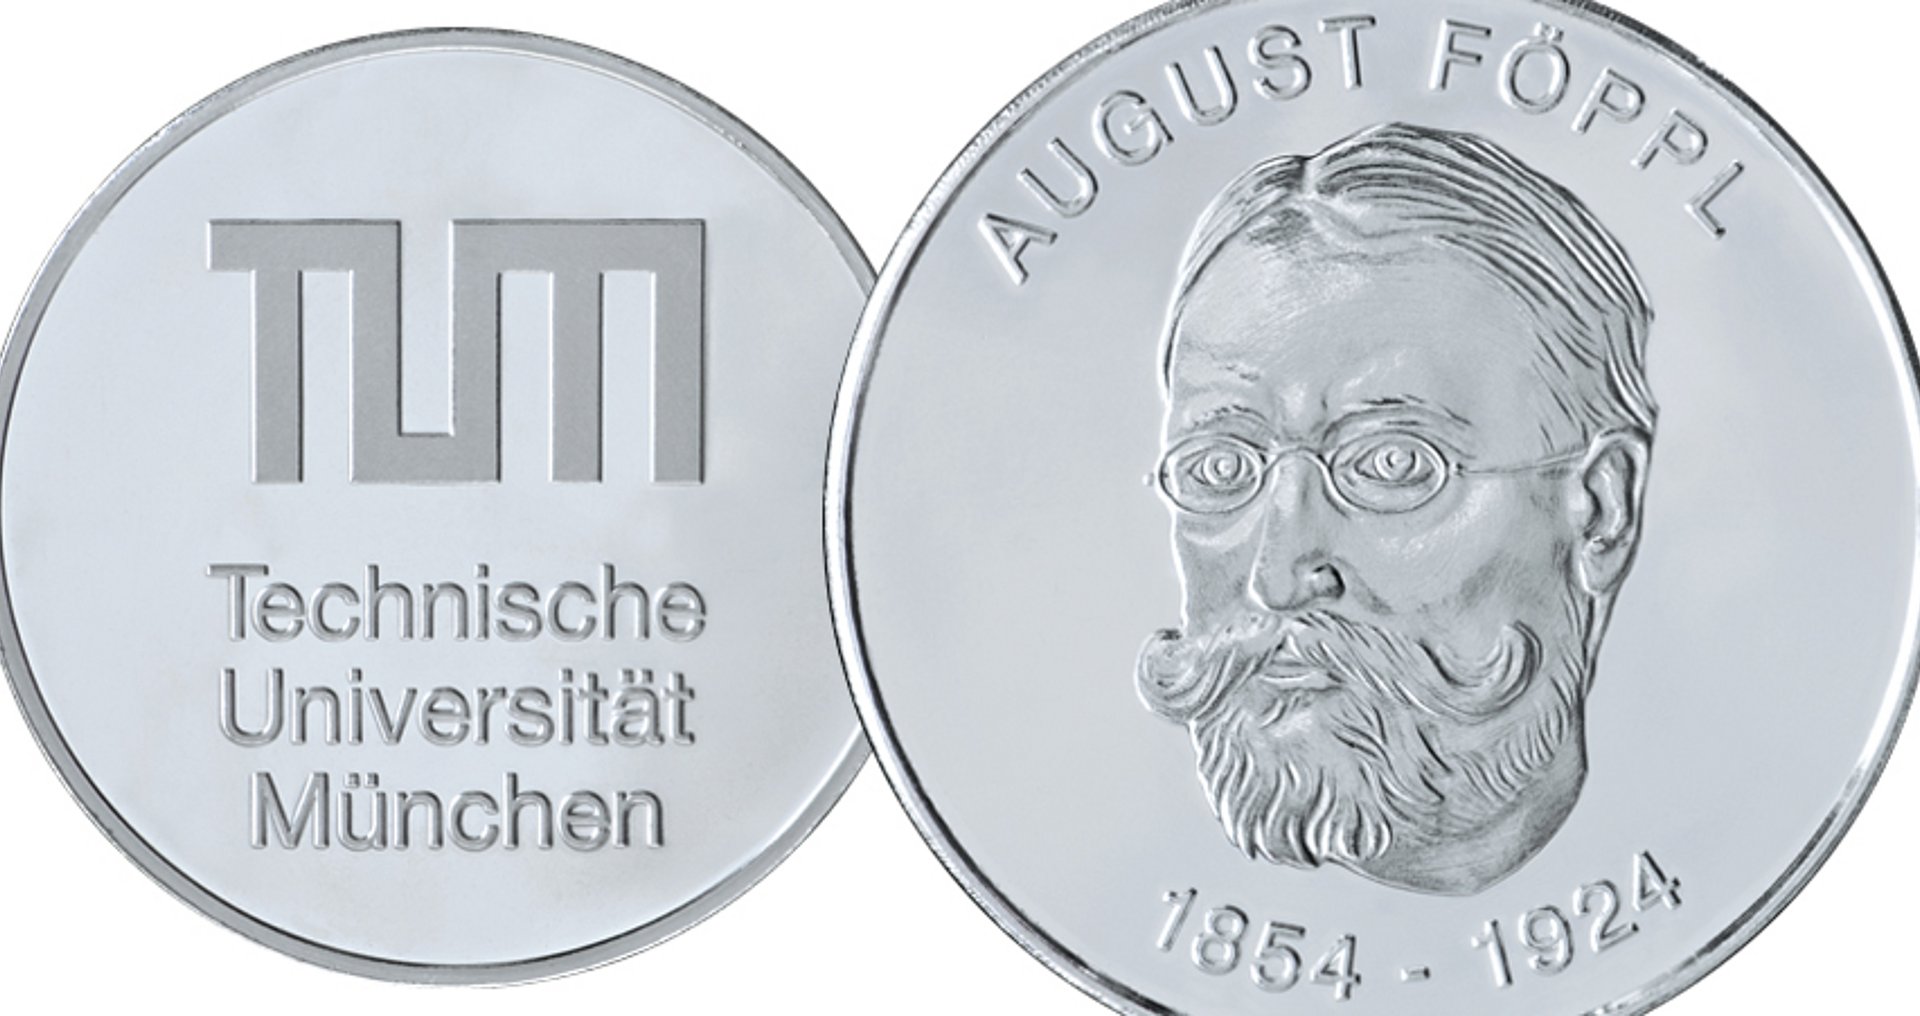 The August Föppl Medal of the Technical University of Munich (TUM)